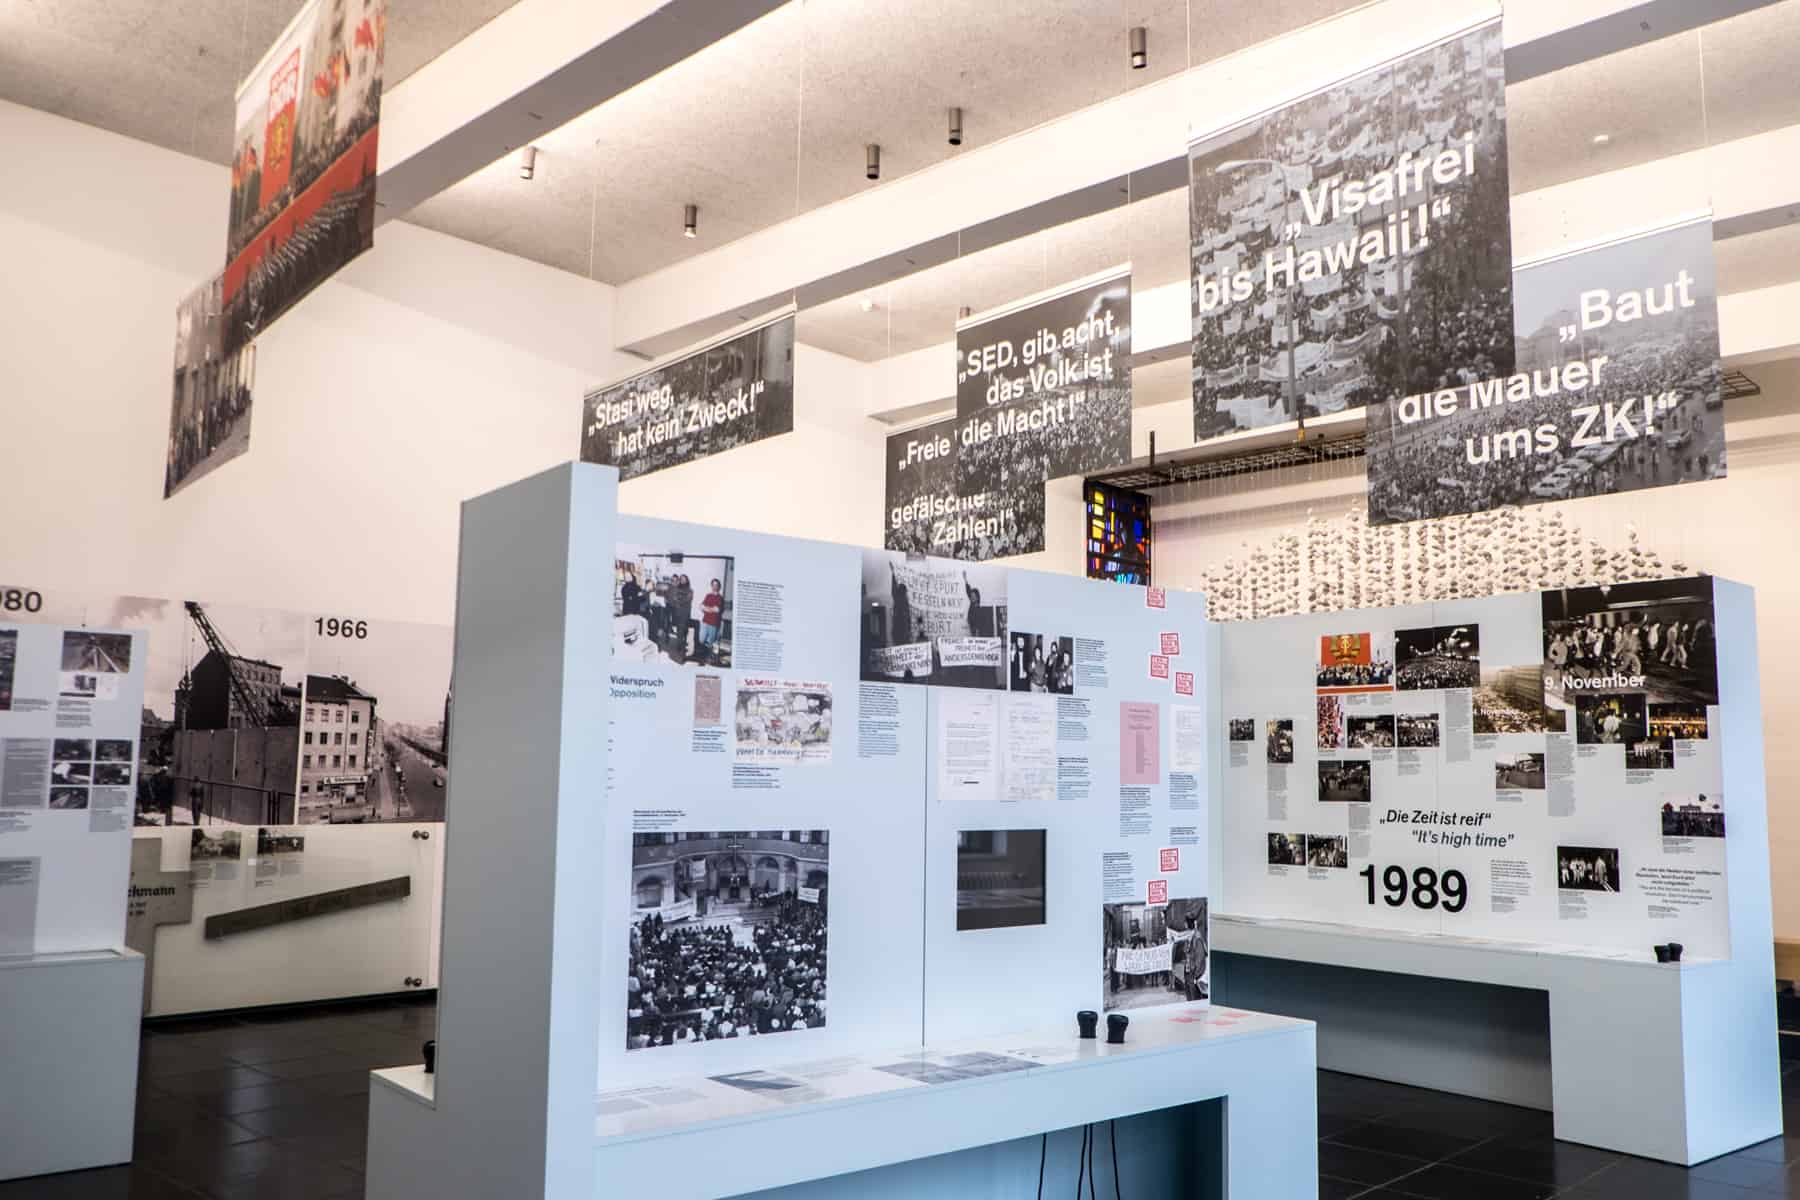 the white information boards and hanging signs inside the Berlin Wall Documentation Centre